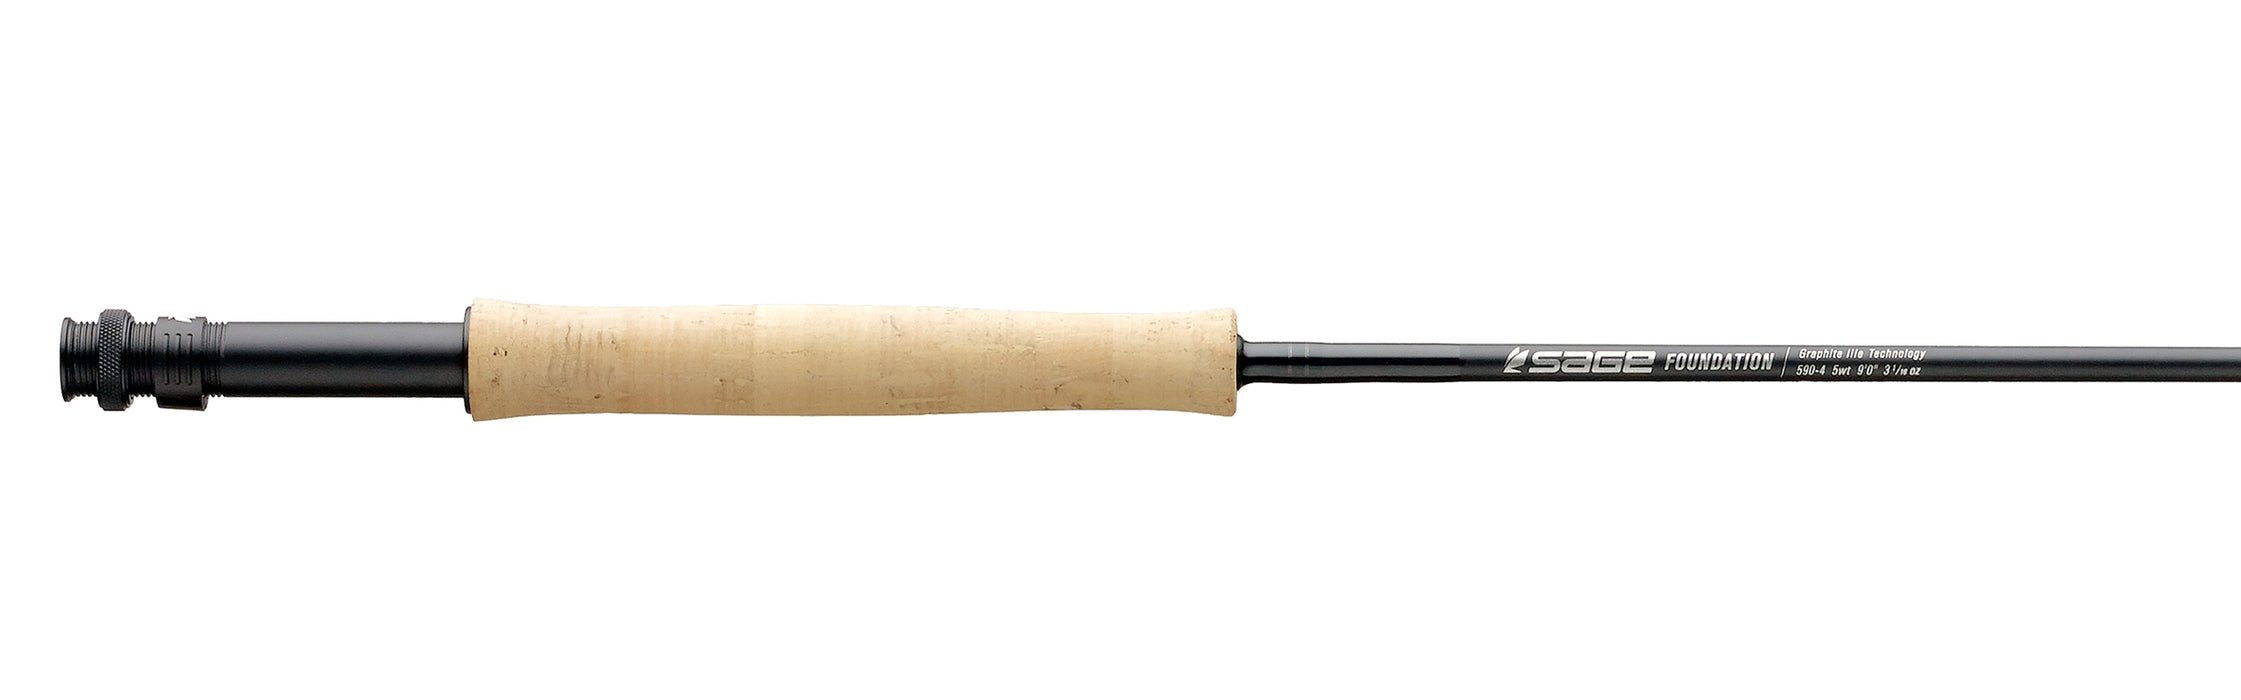 Used Sage Sonic 490-4pc fly rod